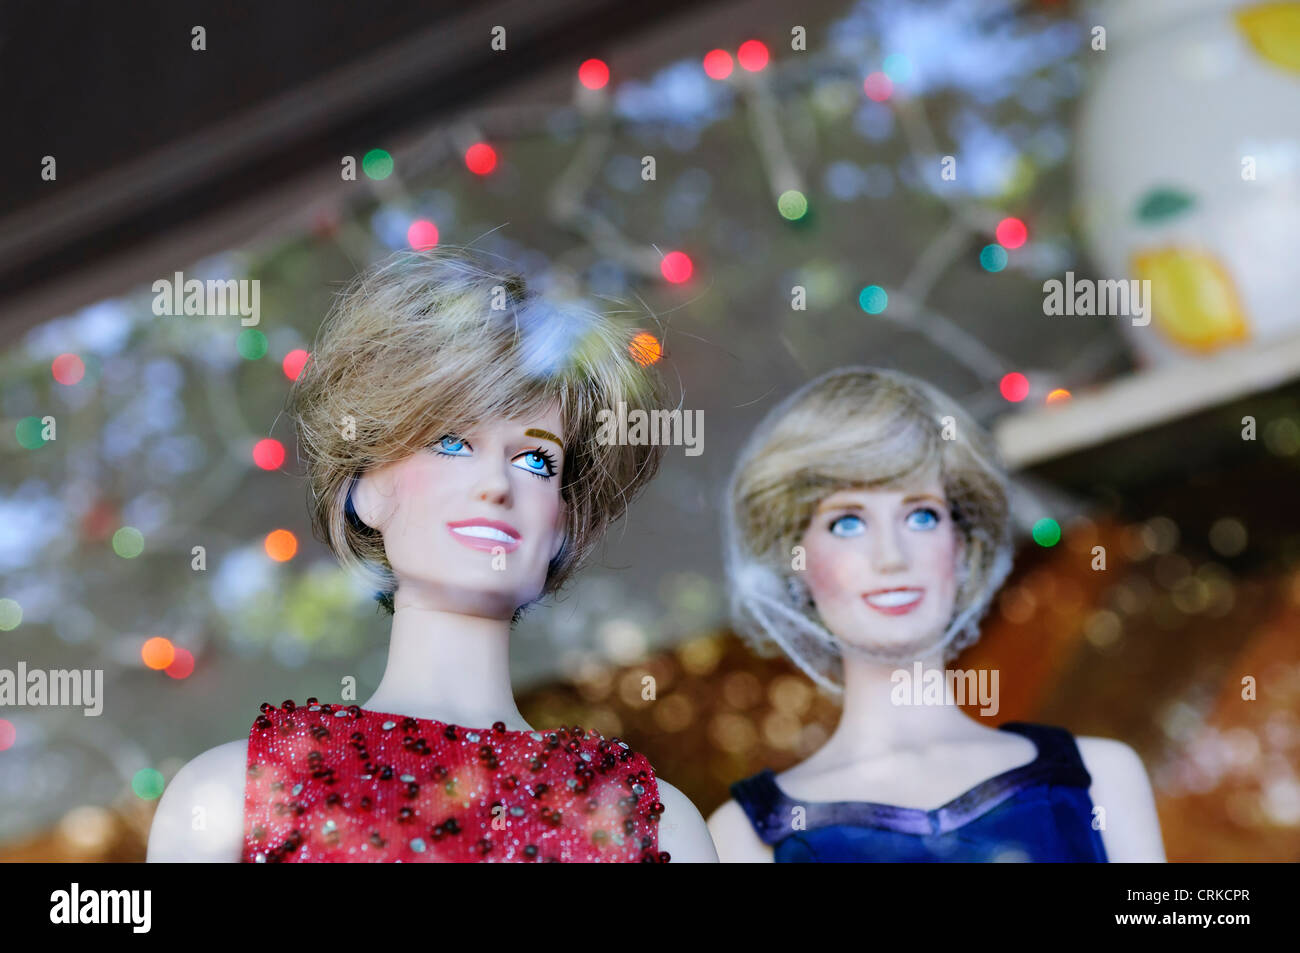 Elegant Princess Diana dolls are featured in this storefront display in downtown Aberdeen, Washington. Stock Photo